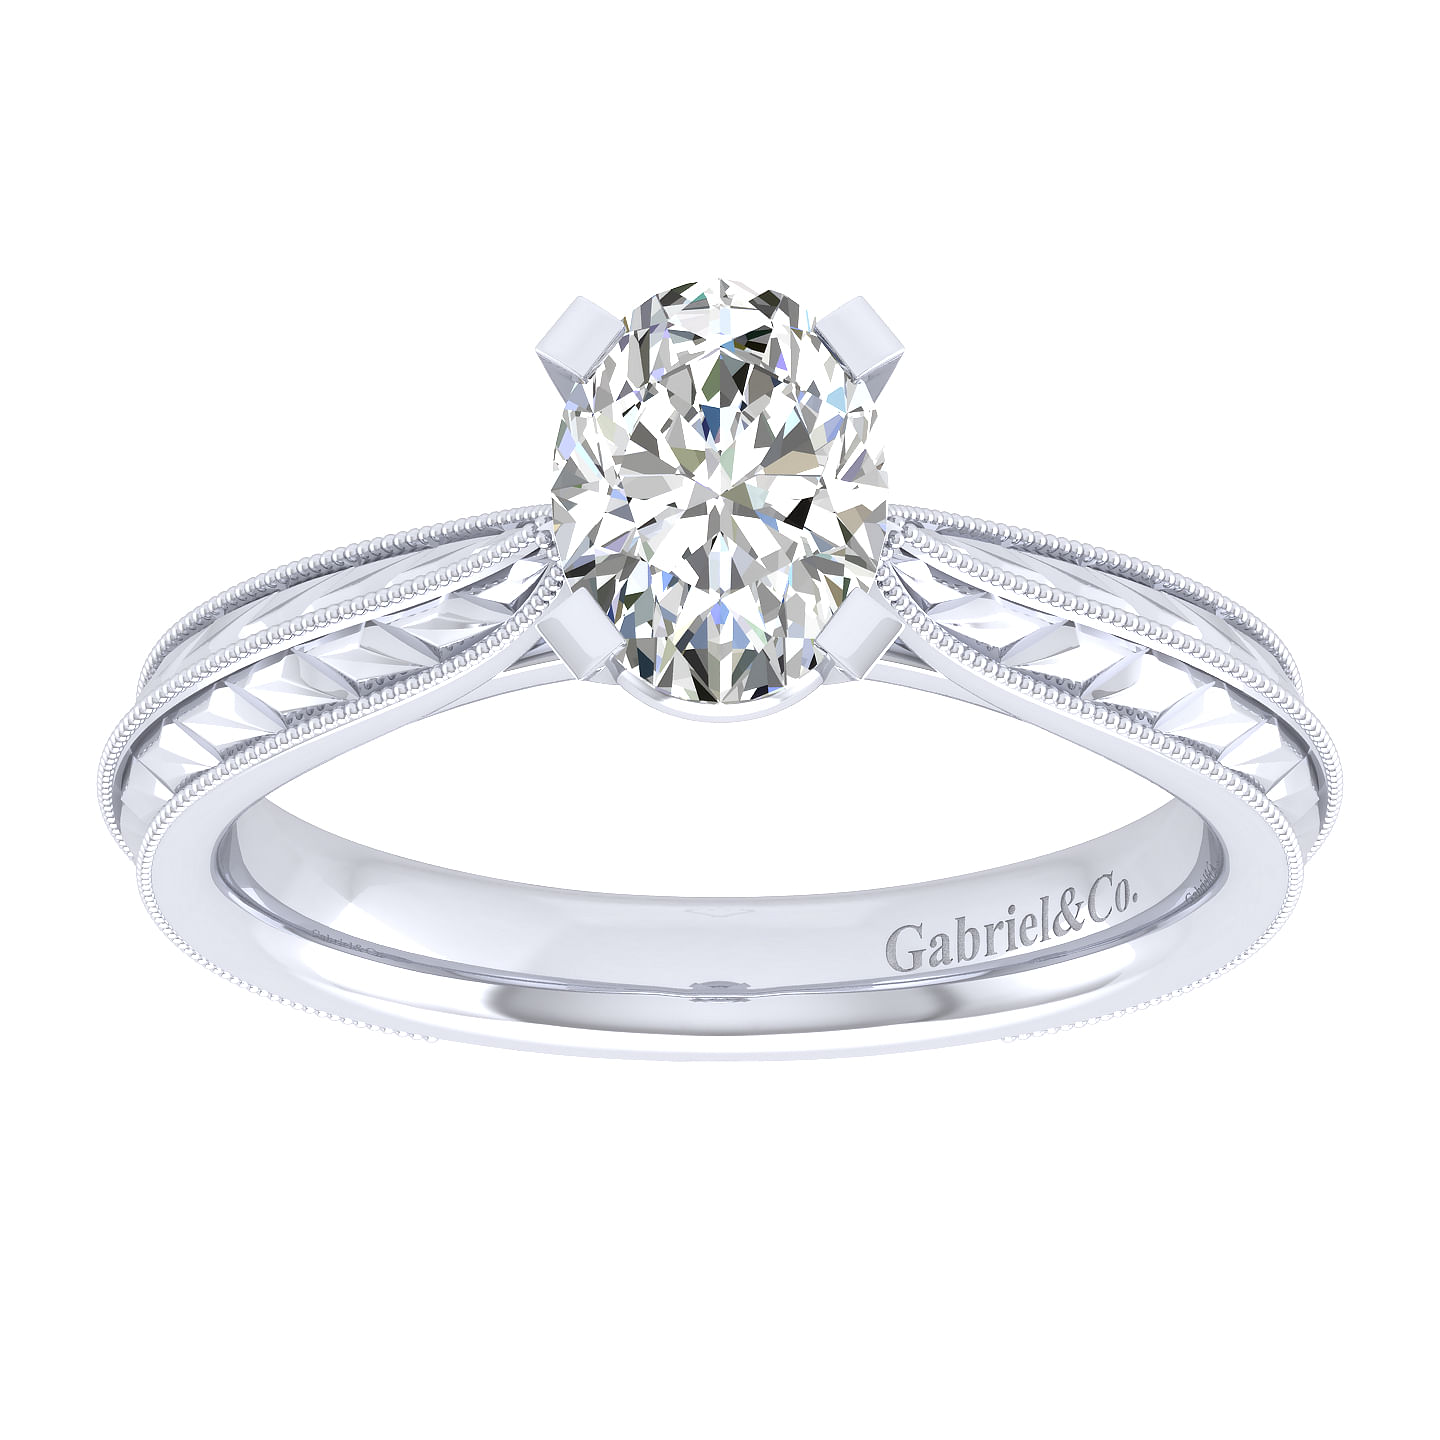 Vintage Inspired 14K White Gold Oval Solitaire Engagement Ring